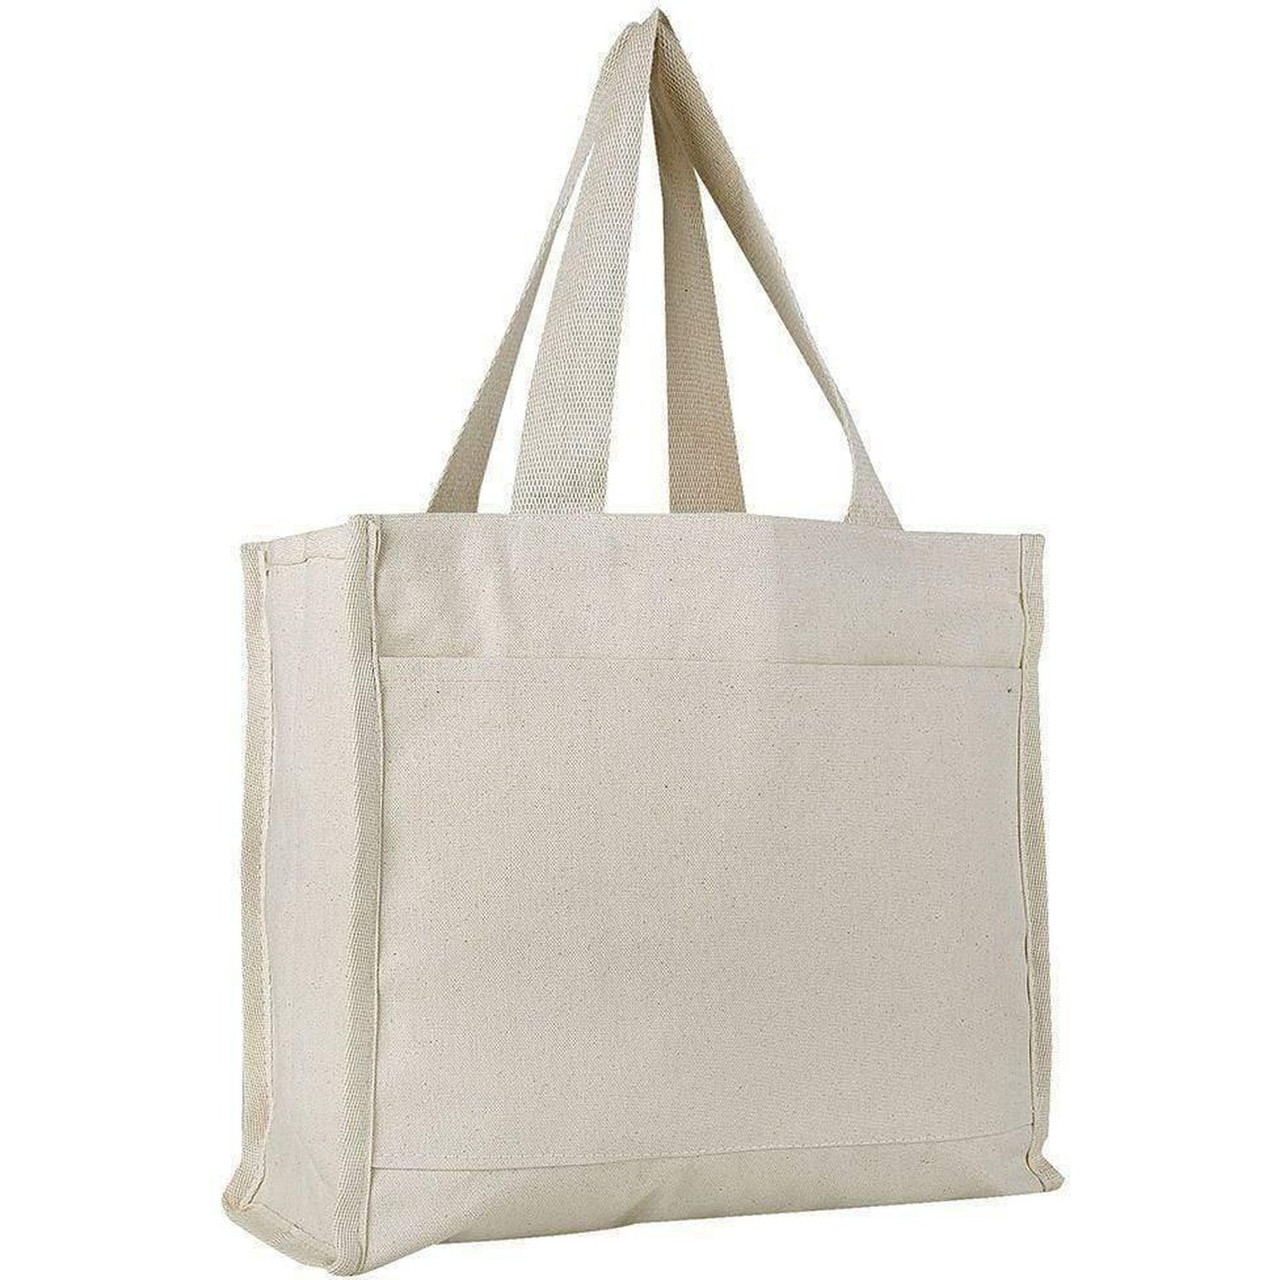 Extra Large Solid Color 5 Pocket Zip Top Long Handle Canvas Tote